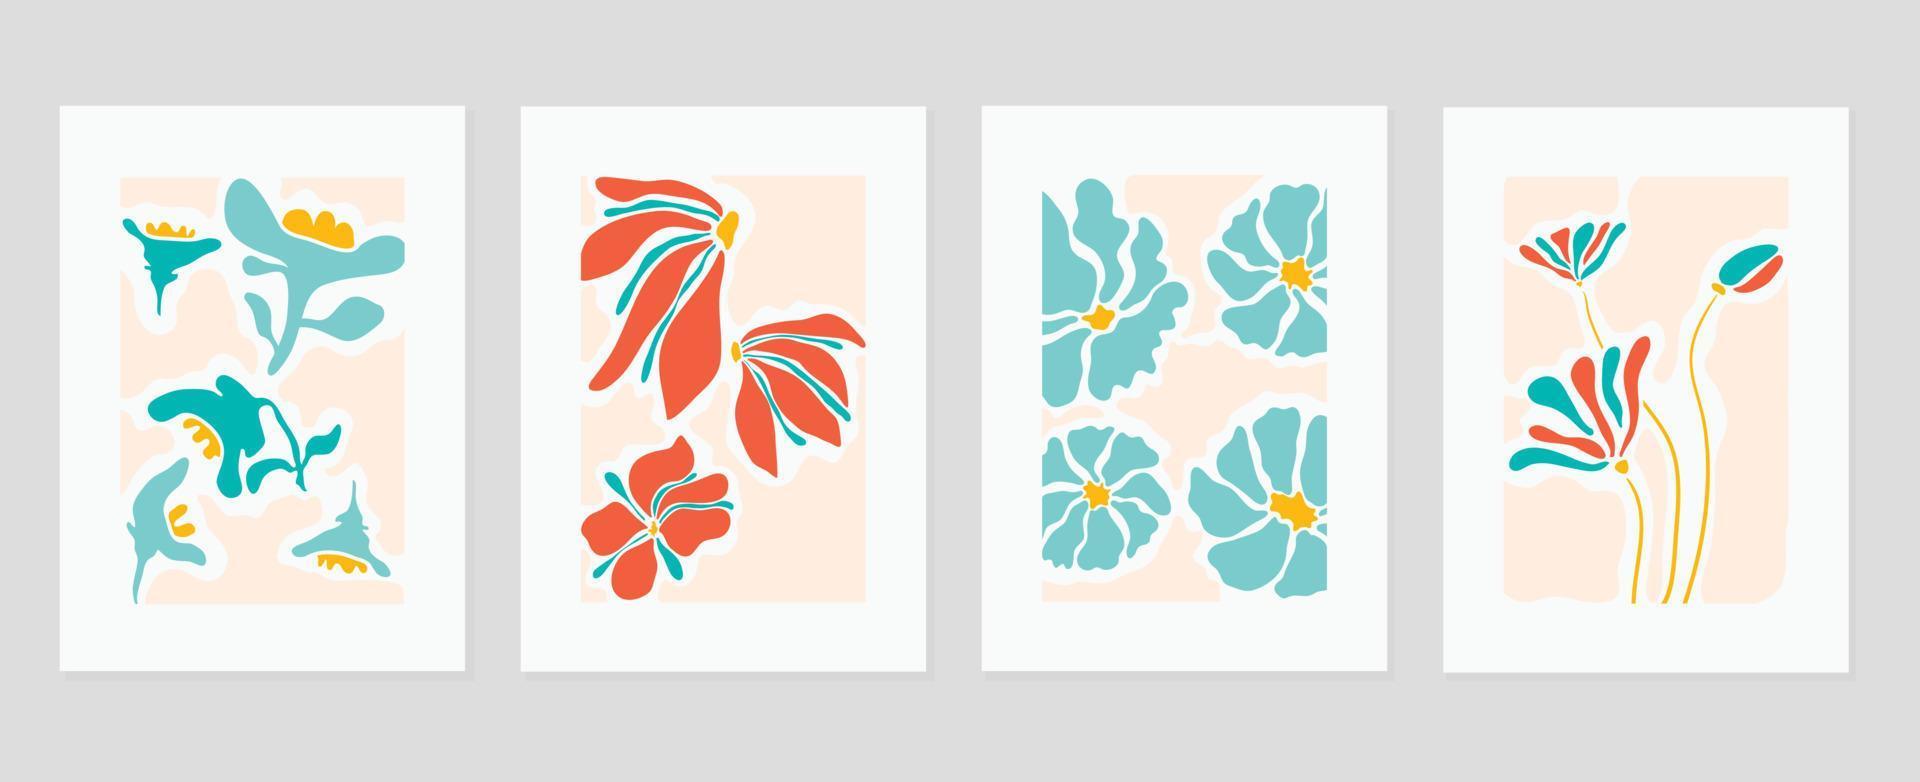 Set of abstract cover background inspired by matisse. Plants, flower, branch, leaf colorful in hand drawn style. Contemporary aesthetic illustrated design for wall art, decoration, wallpaper, print. vector